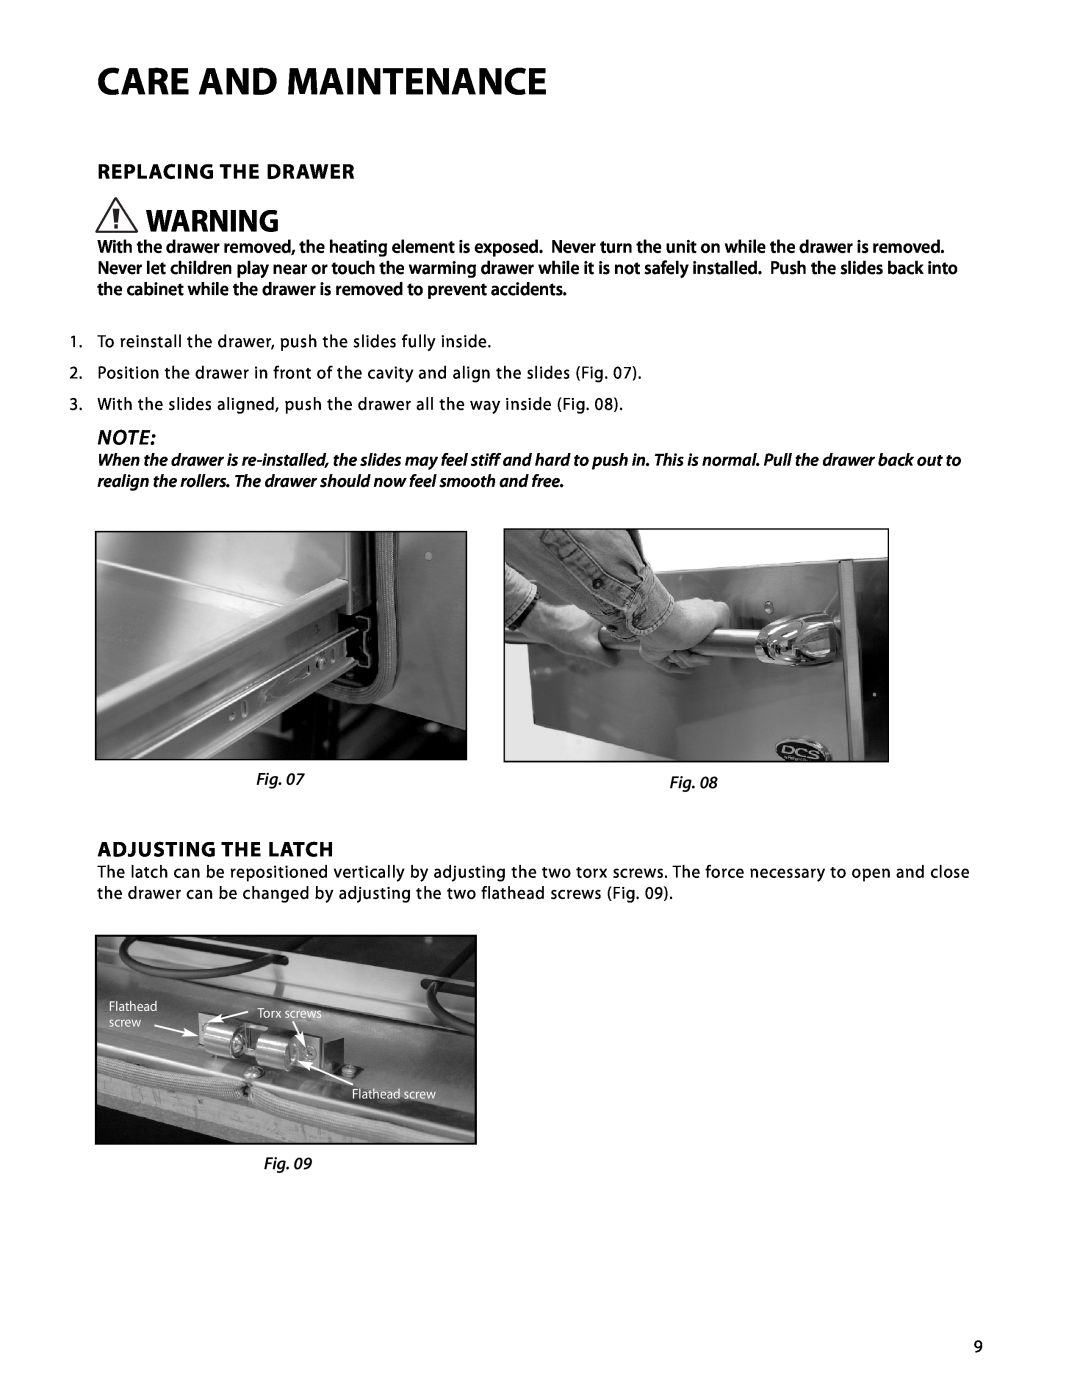 DCS WDTI, WDT-30 manual Care And Maintenance, Replacing The Drawer, Adjusting The Latch 